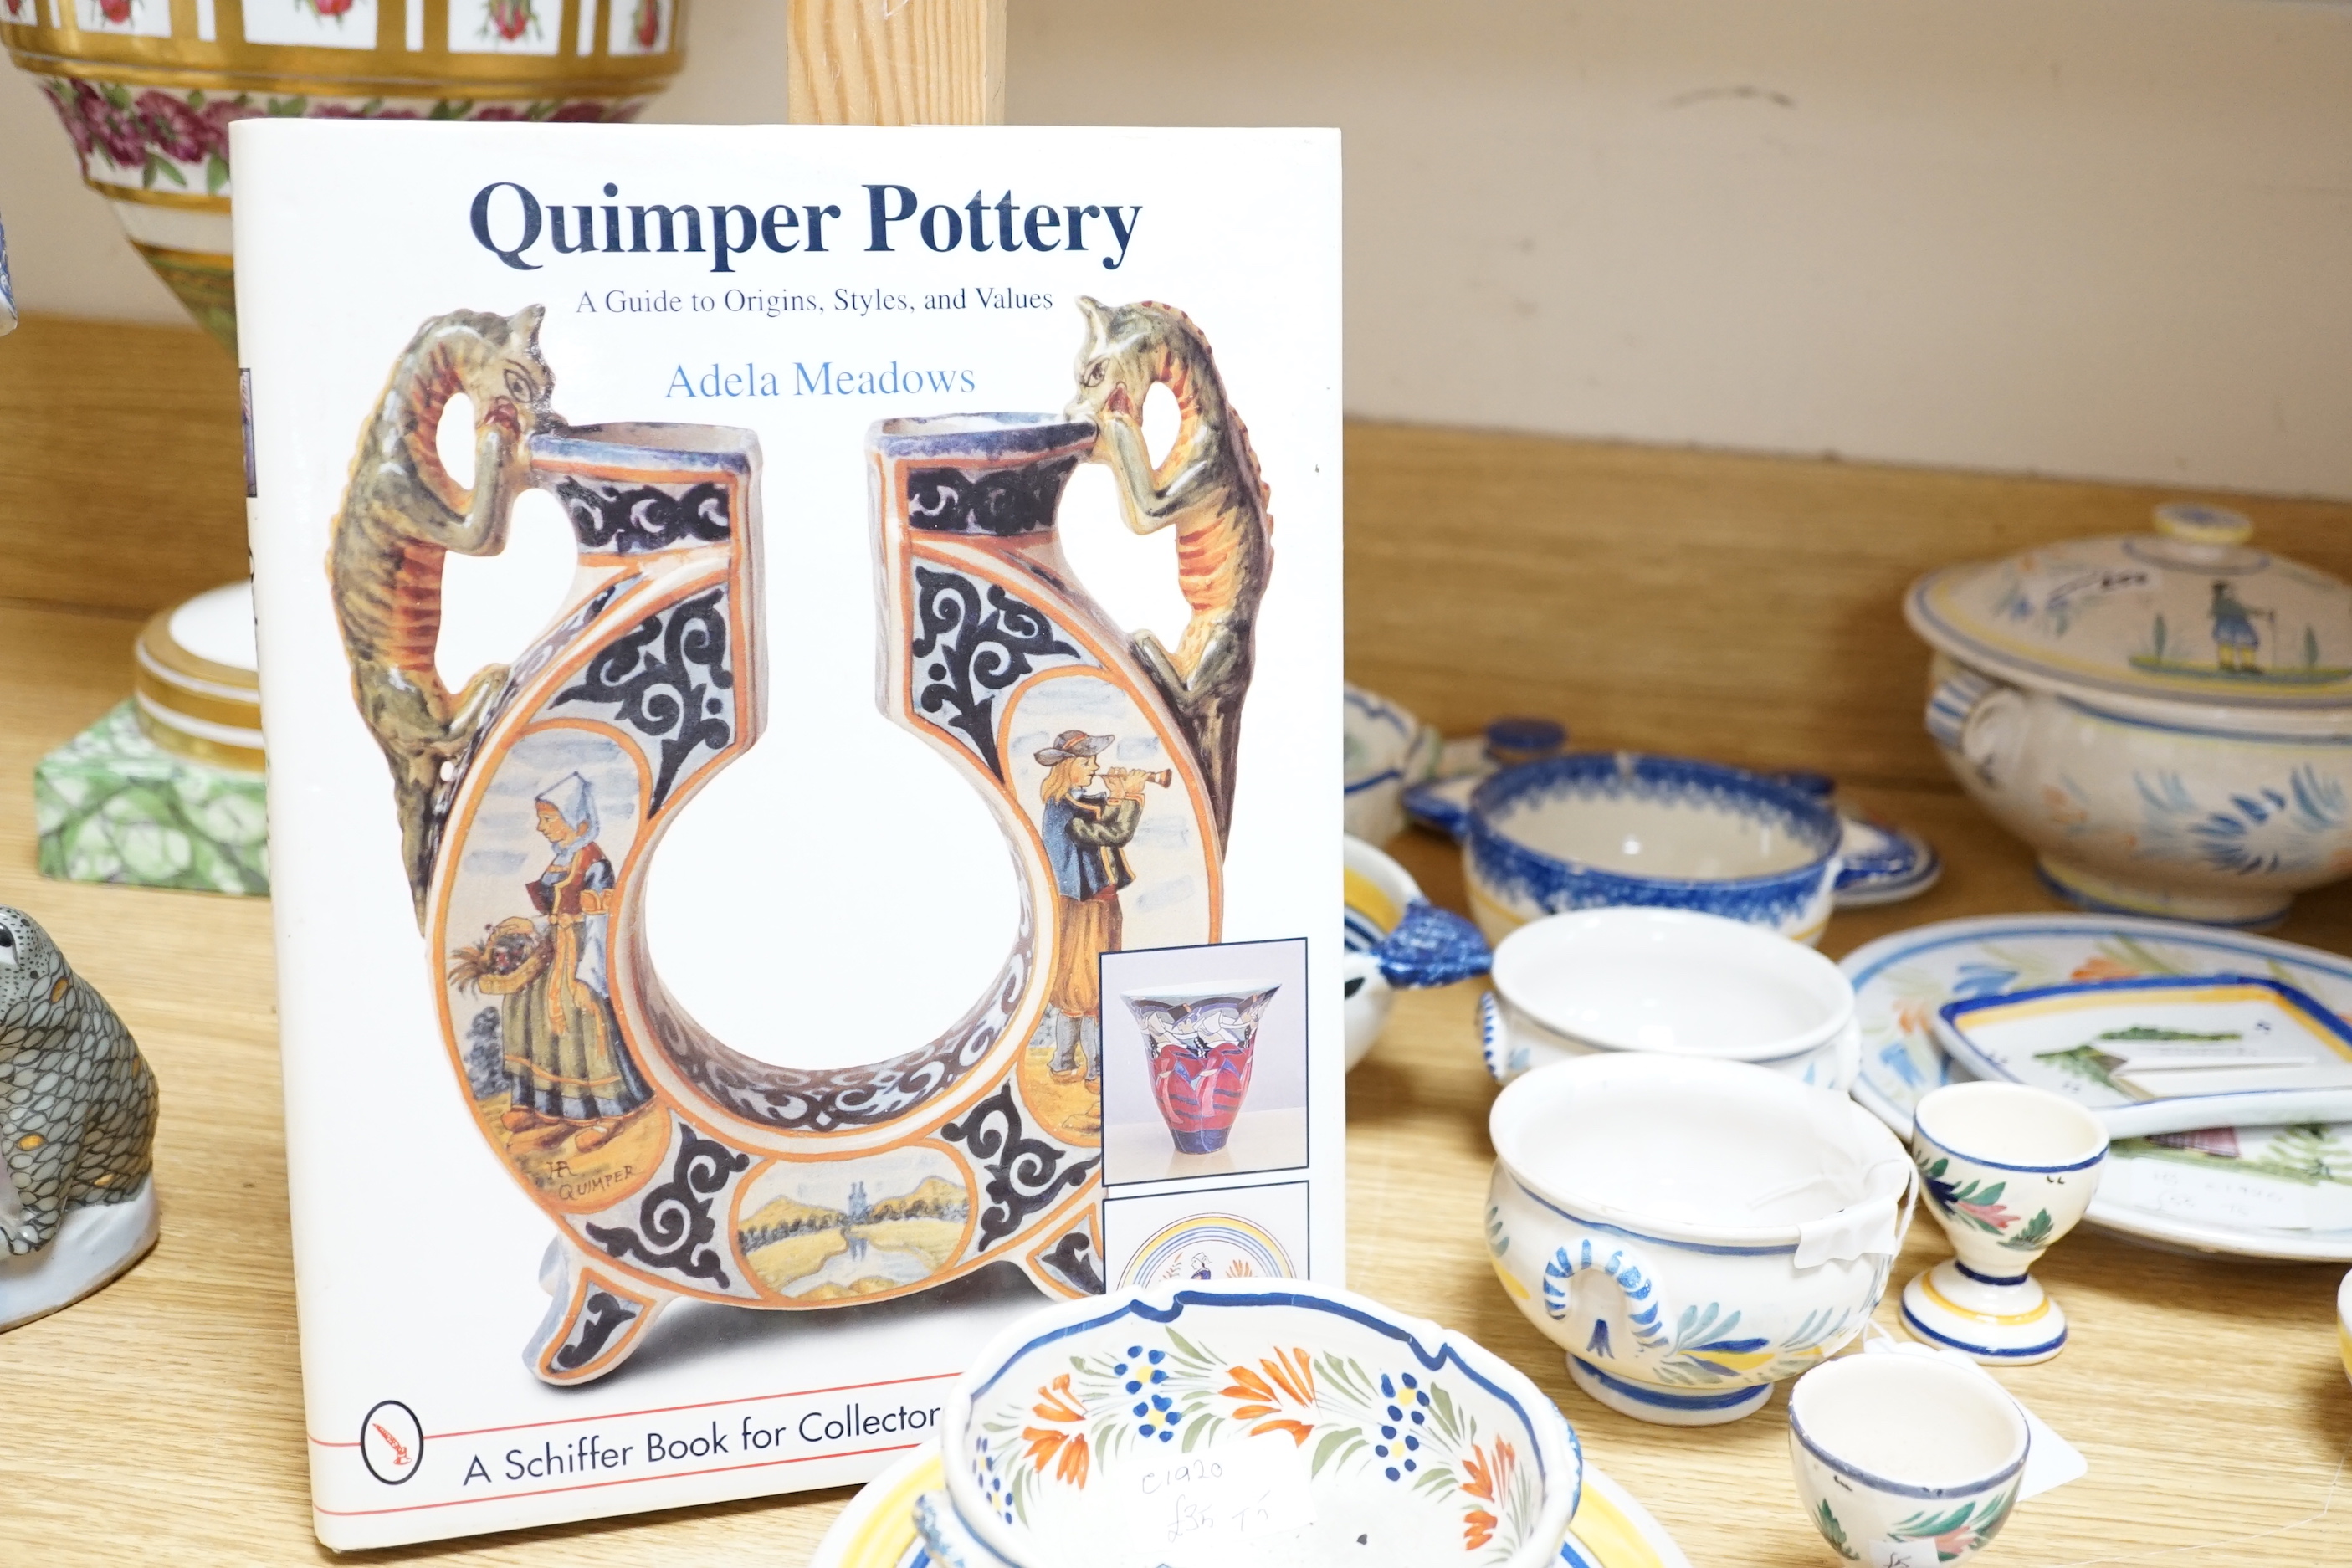 A group of Quimper pottery and a Quimper Pottery book by Angela Meadows